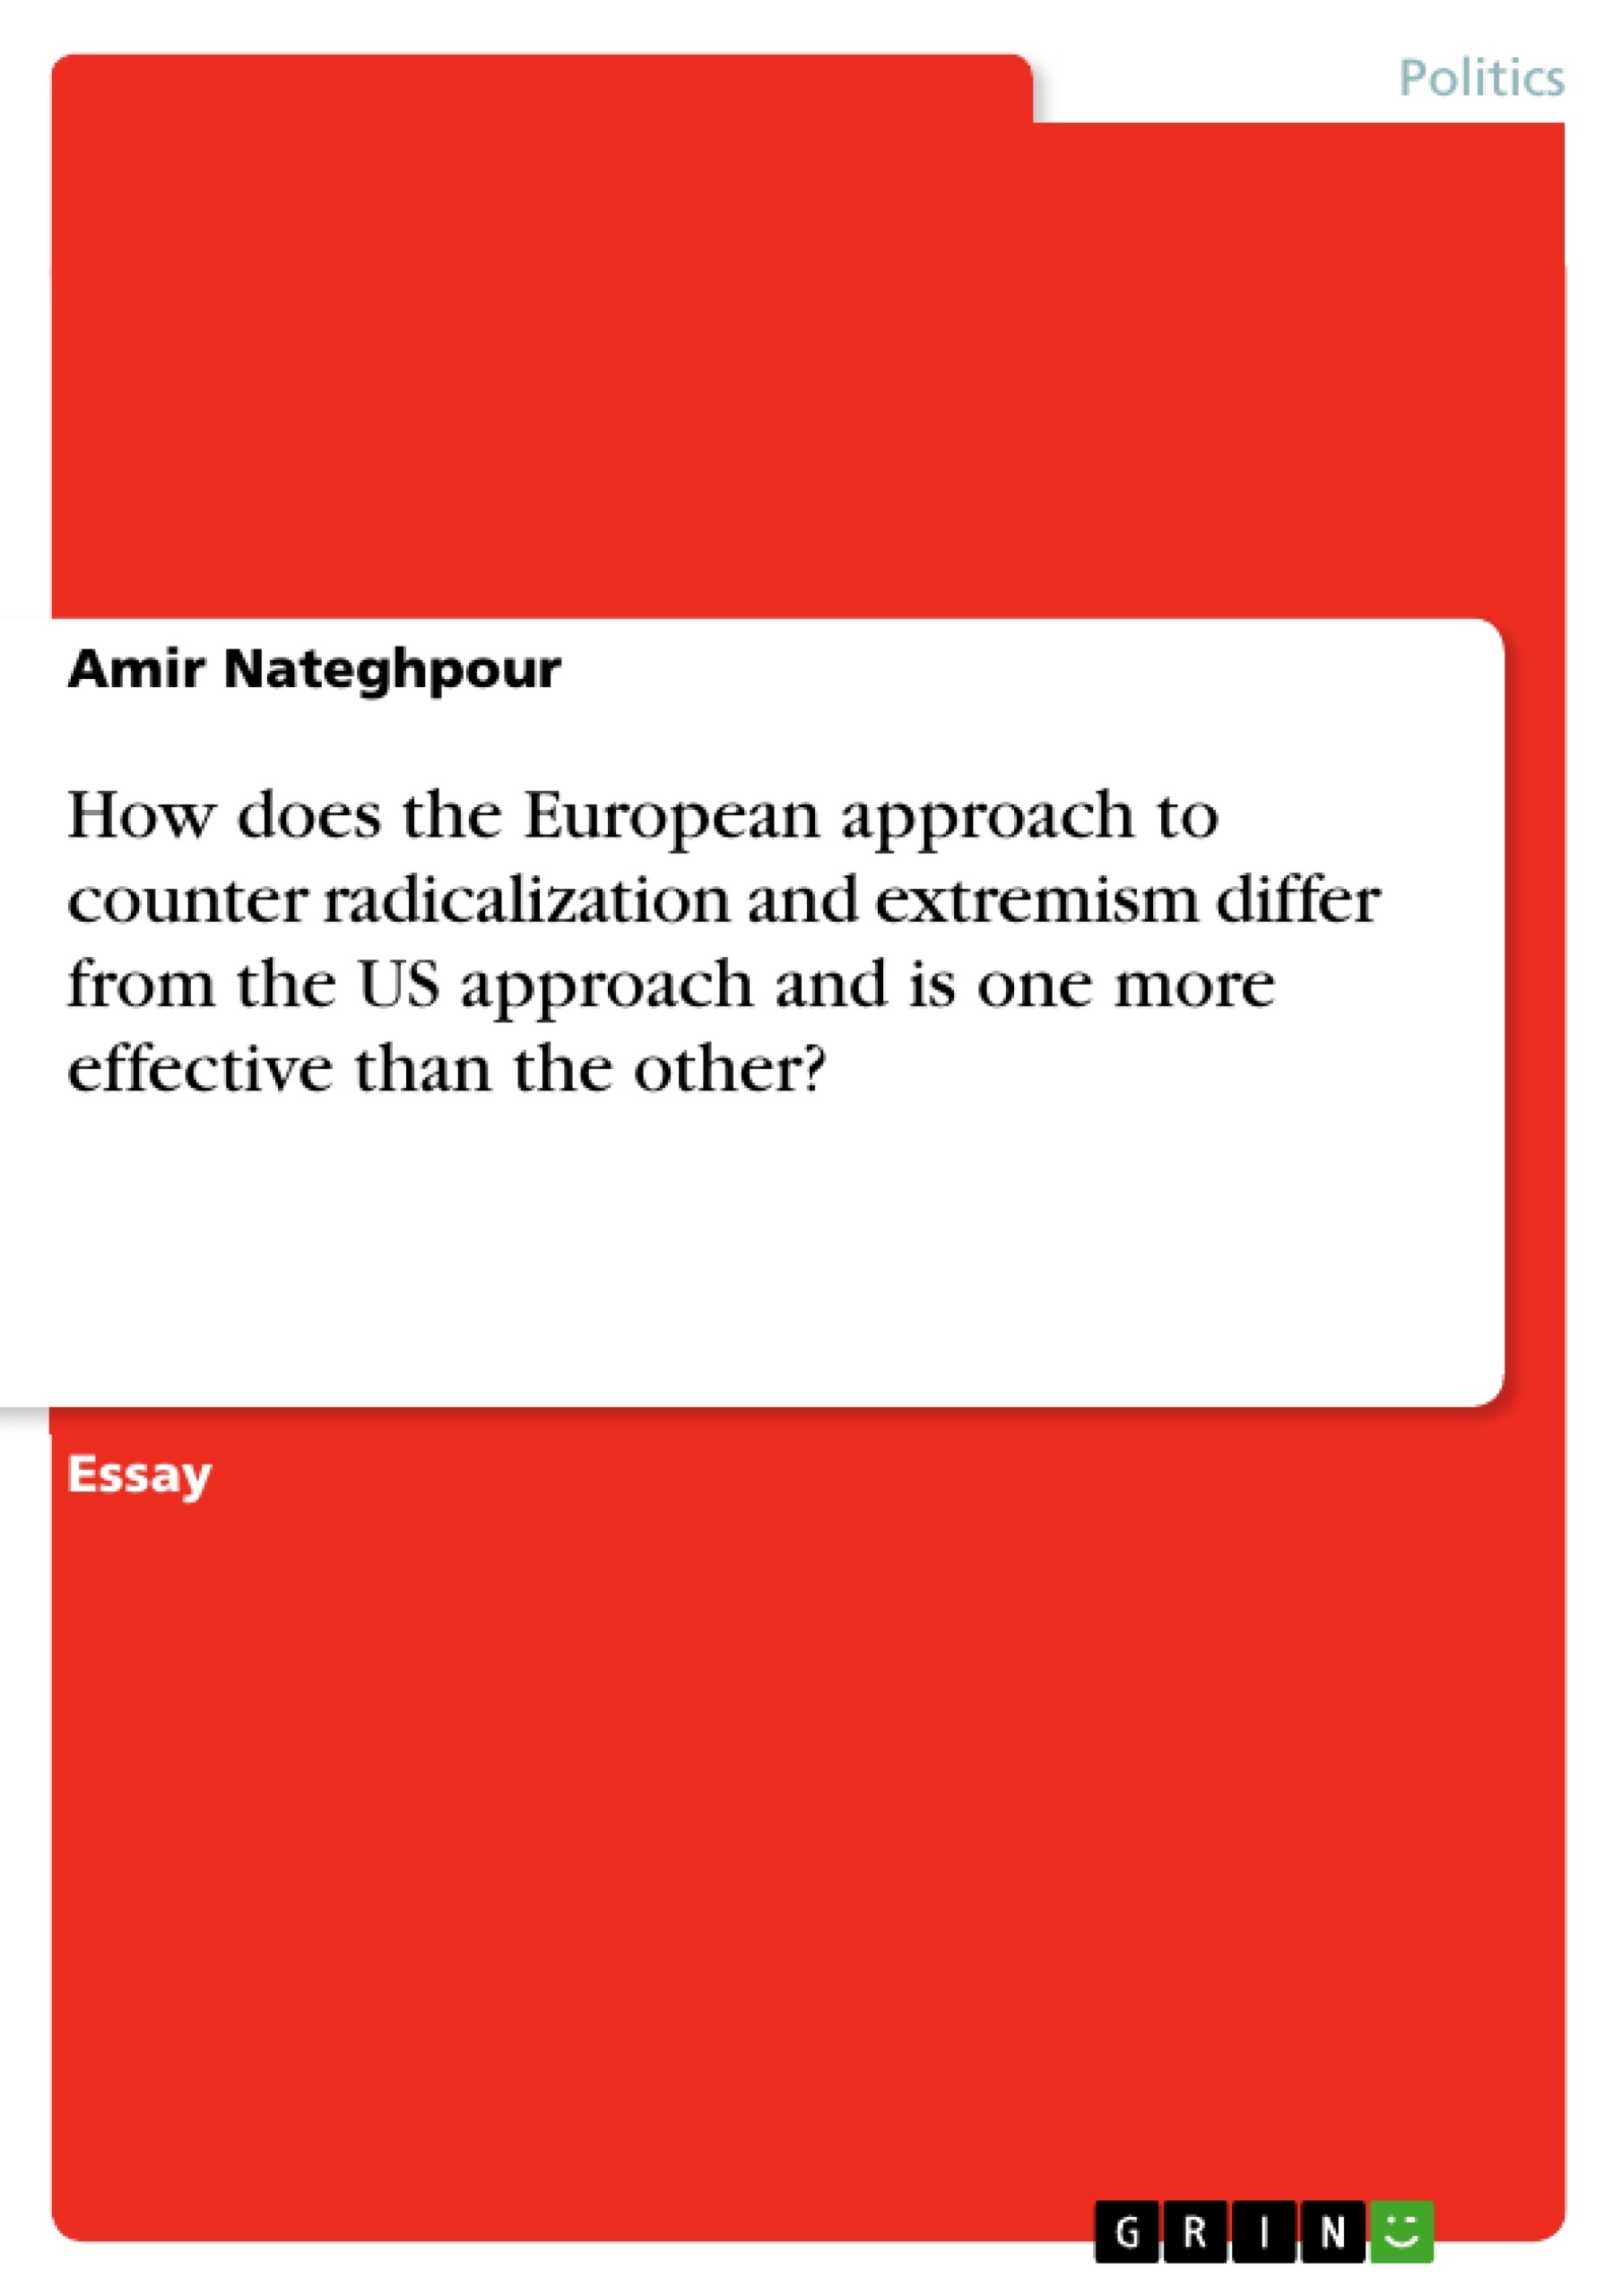 Titre: How does the European approach to counter radicalization and extremism differ from the US approach and is one more effective than the other?